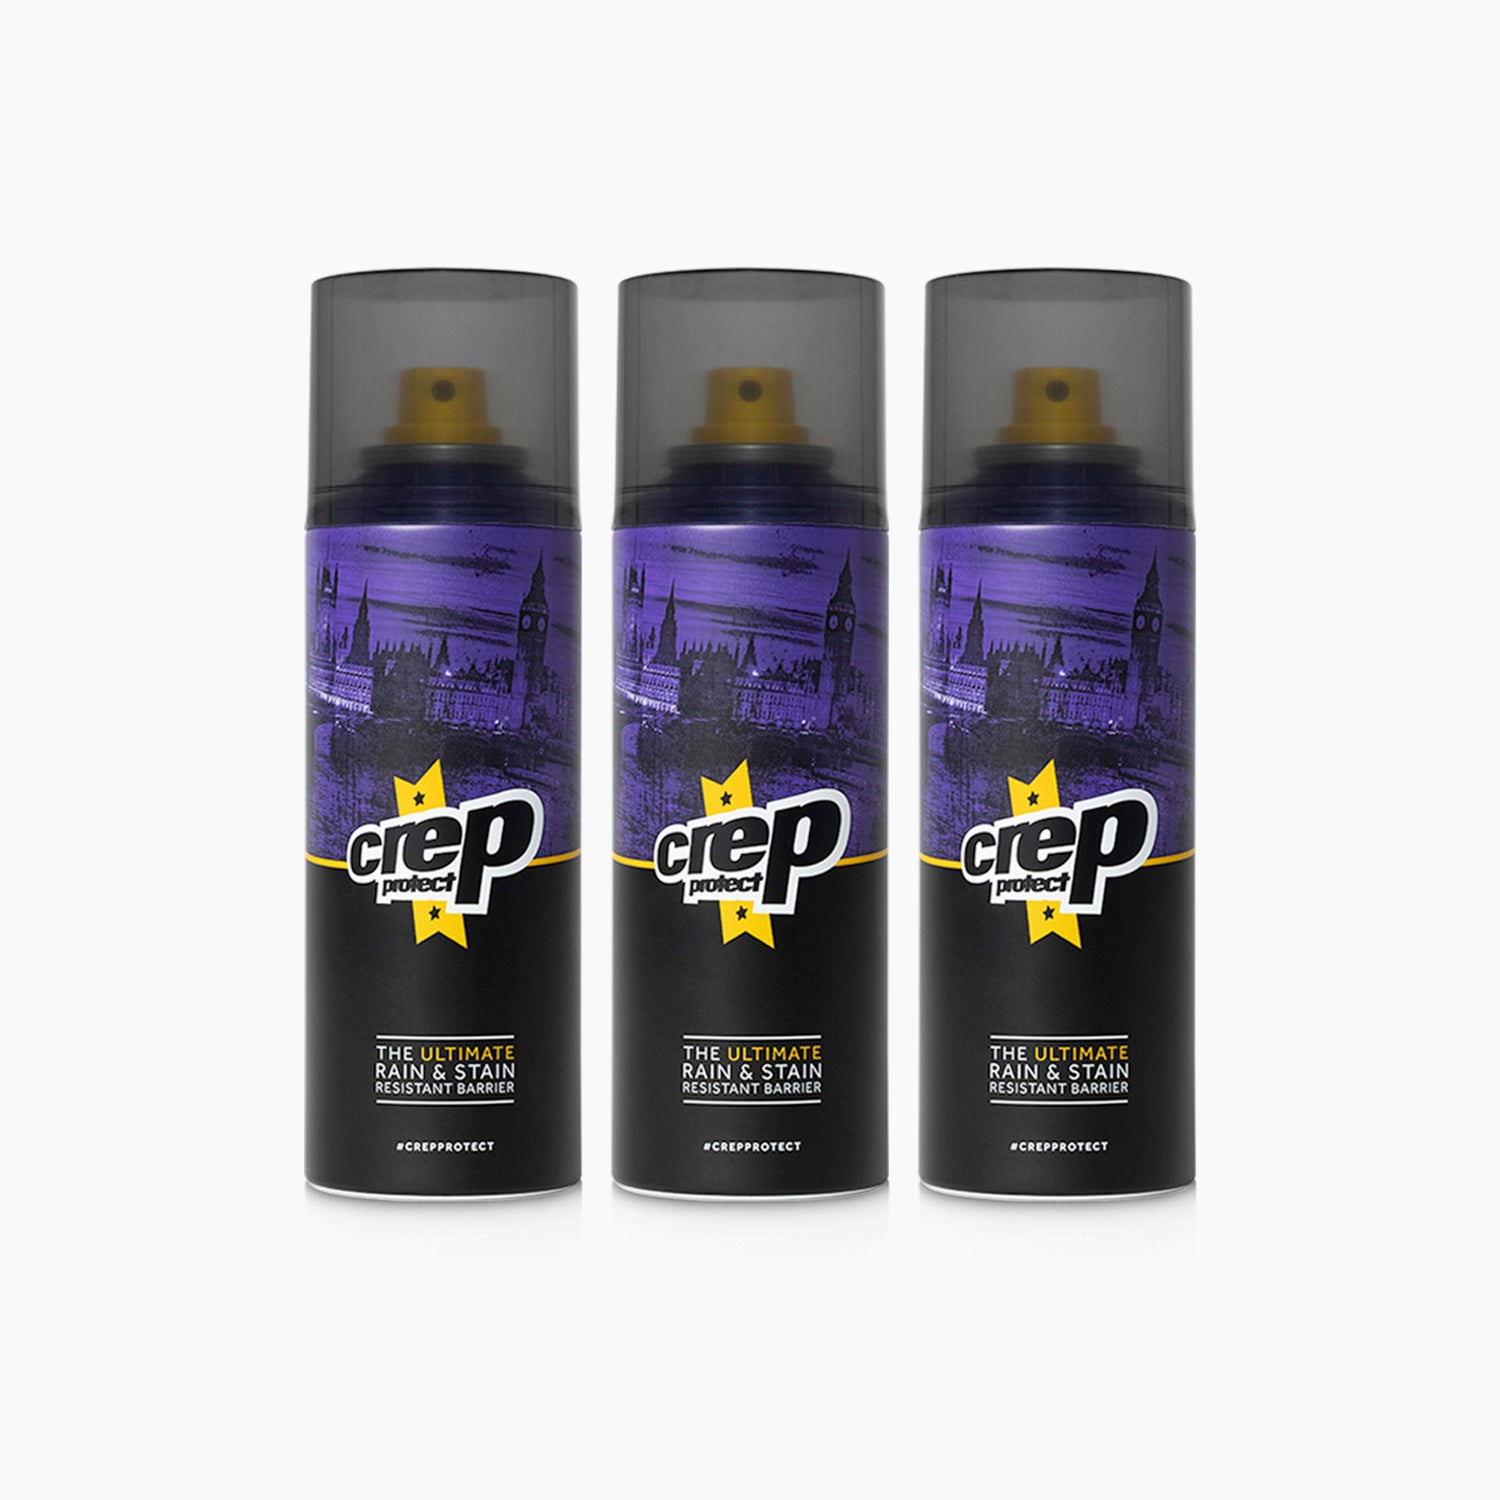 Crep Protect The Ultimate Rain & Stain Resistant Barrier Spray - 200 ml  Multi